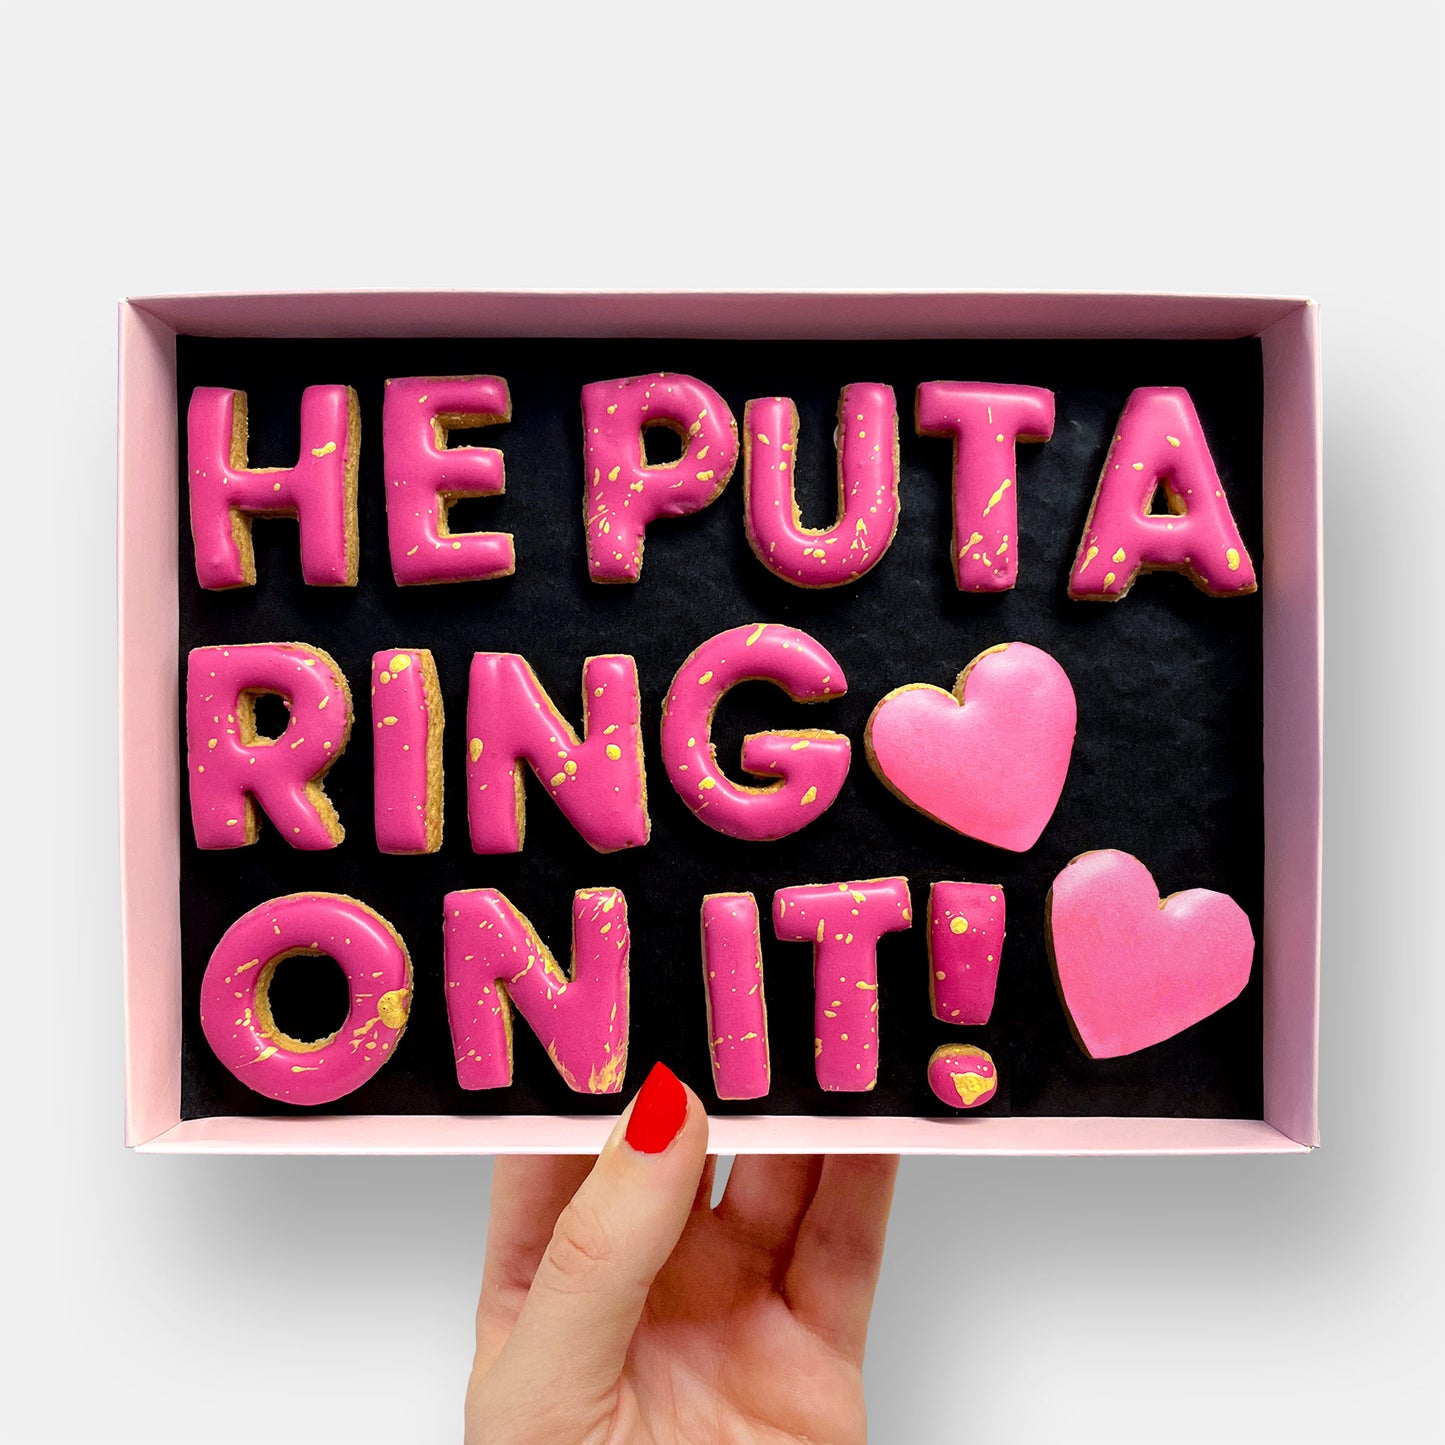 He Put A Ring On It! Letterbox Message Cookies